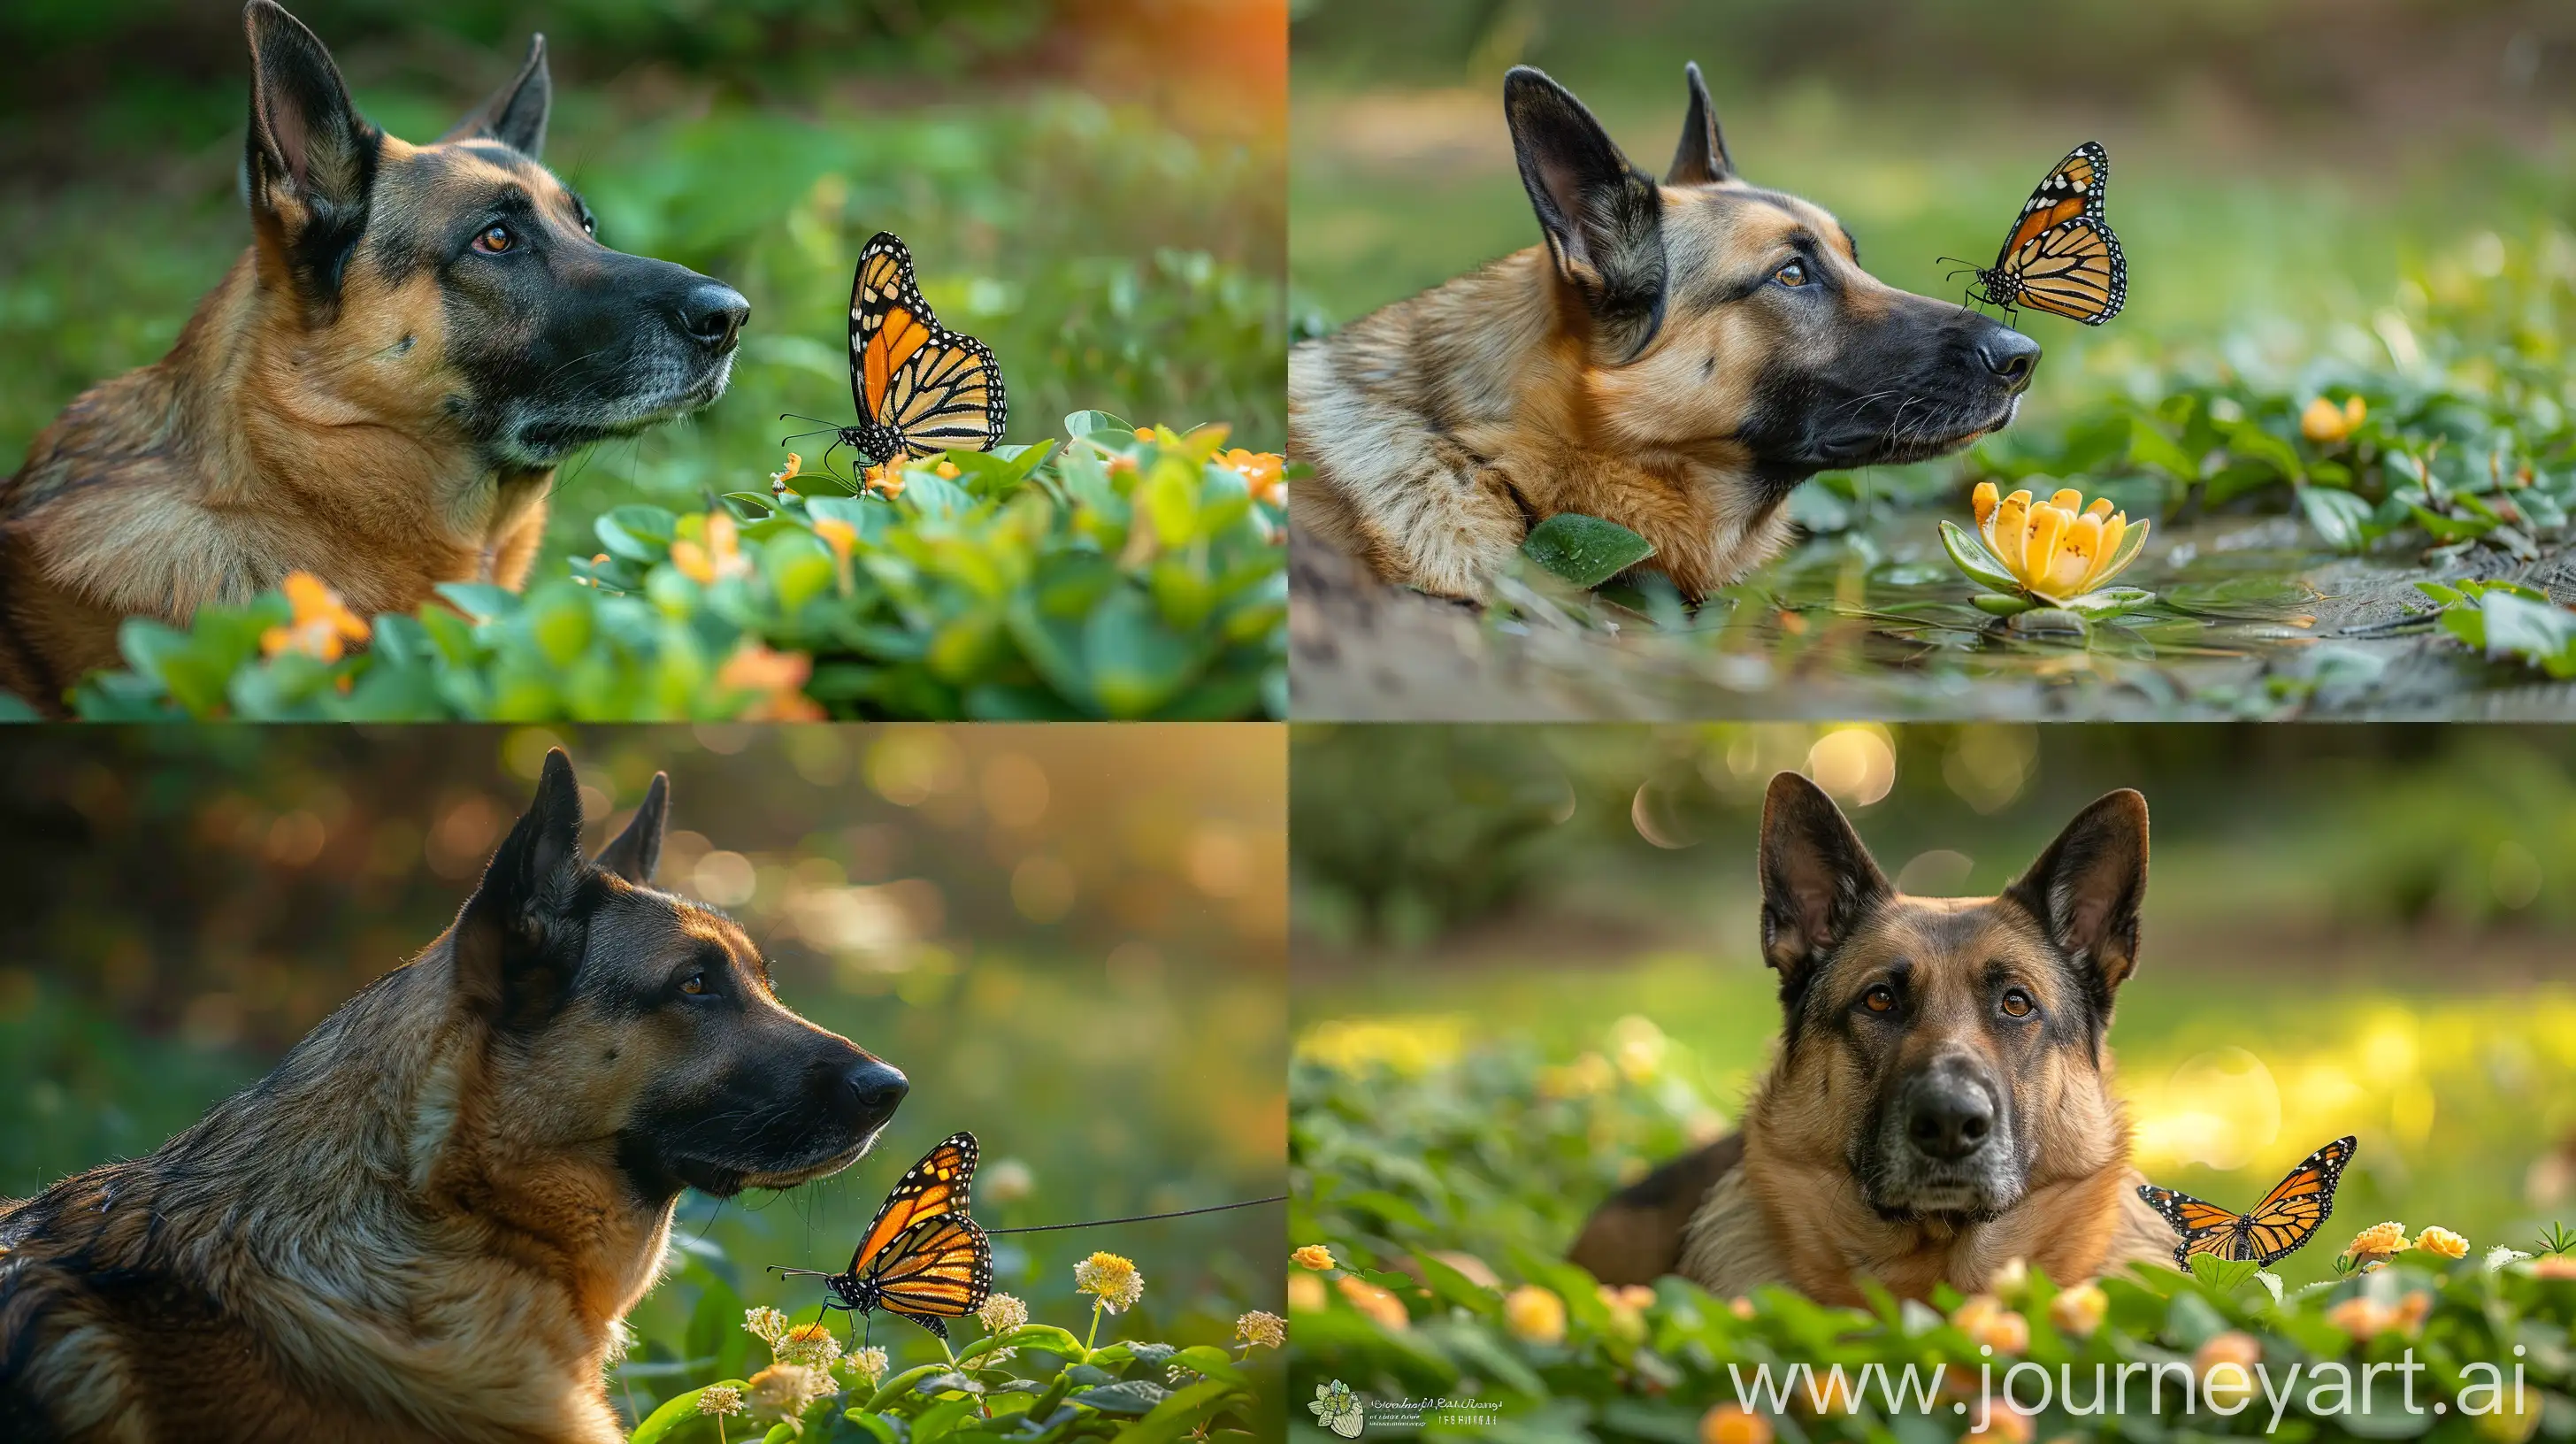 captures a serene moment between a German Shepherd and a Monarch butterfly in a natural, green setting. It's a heartwarming scene that shows a gentle side of nature's interactions --ar 16:9 --s 750 